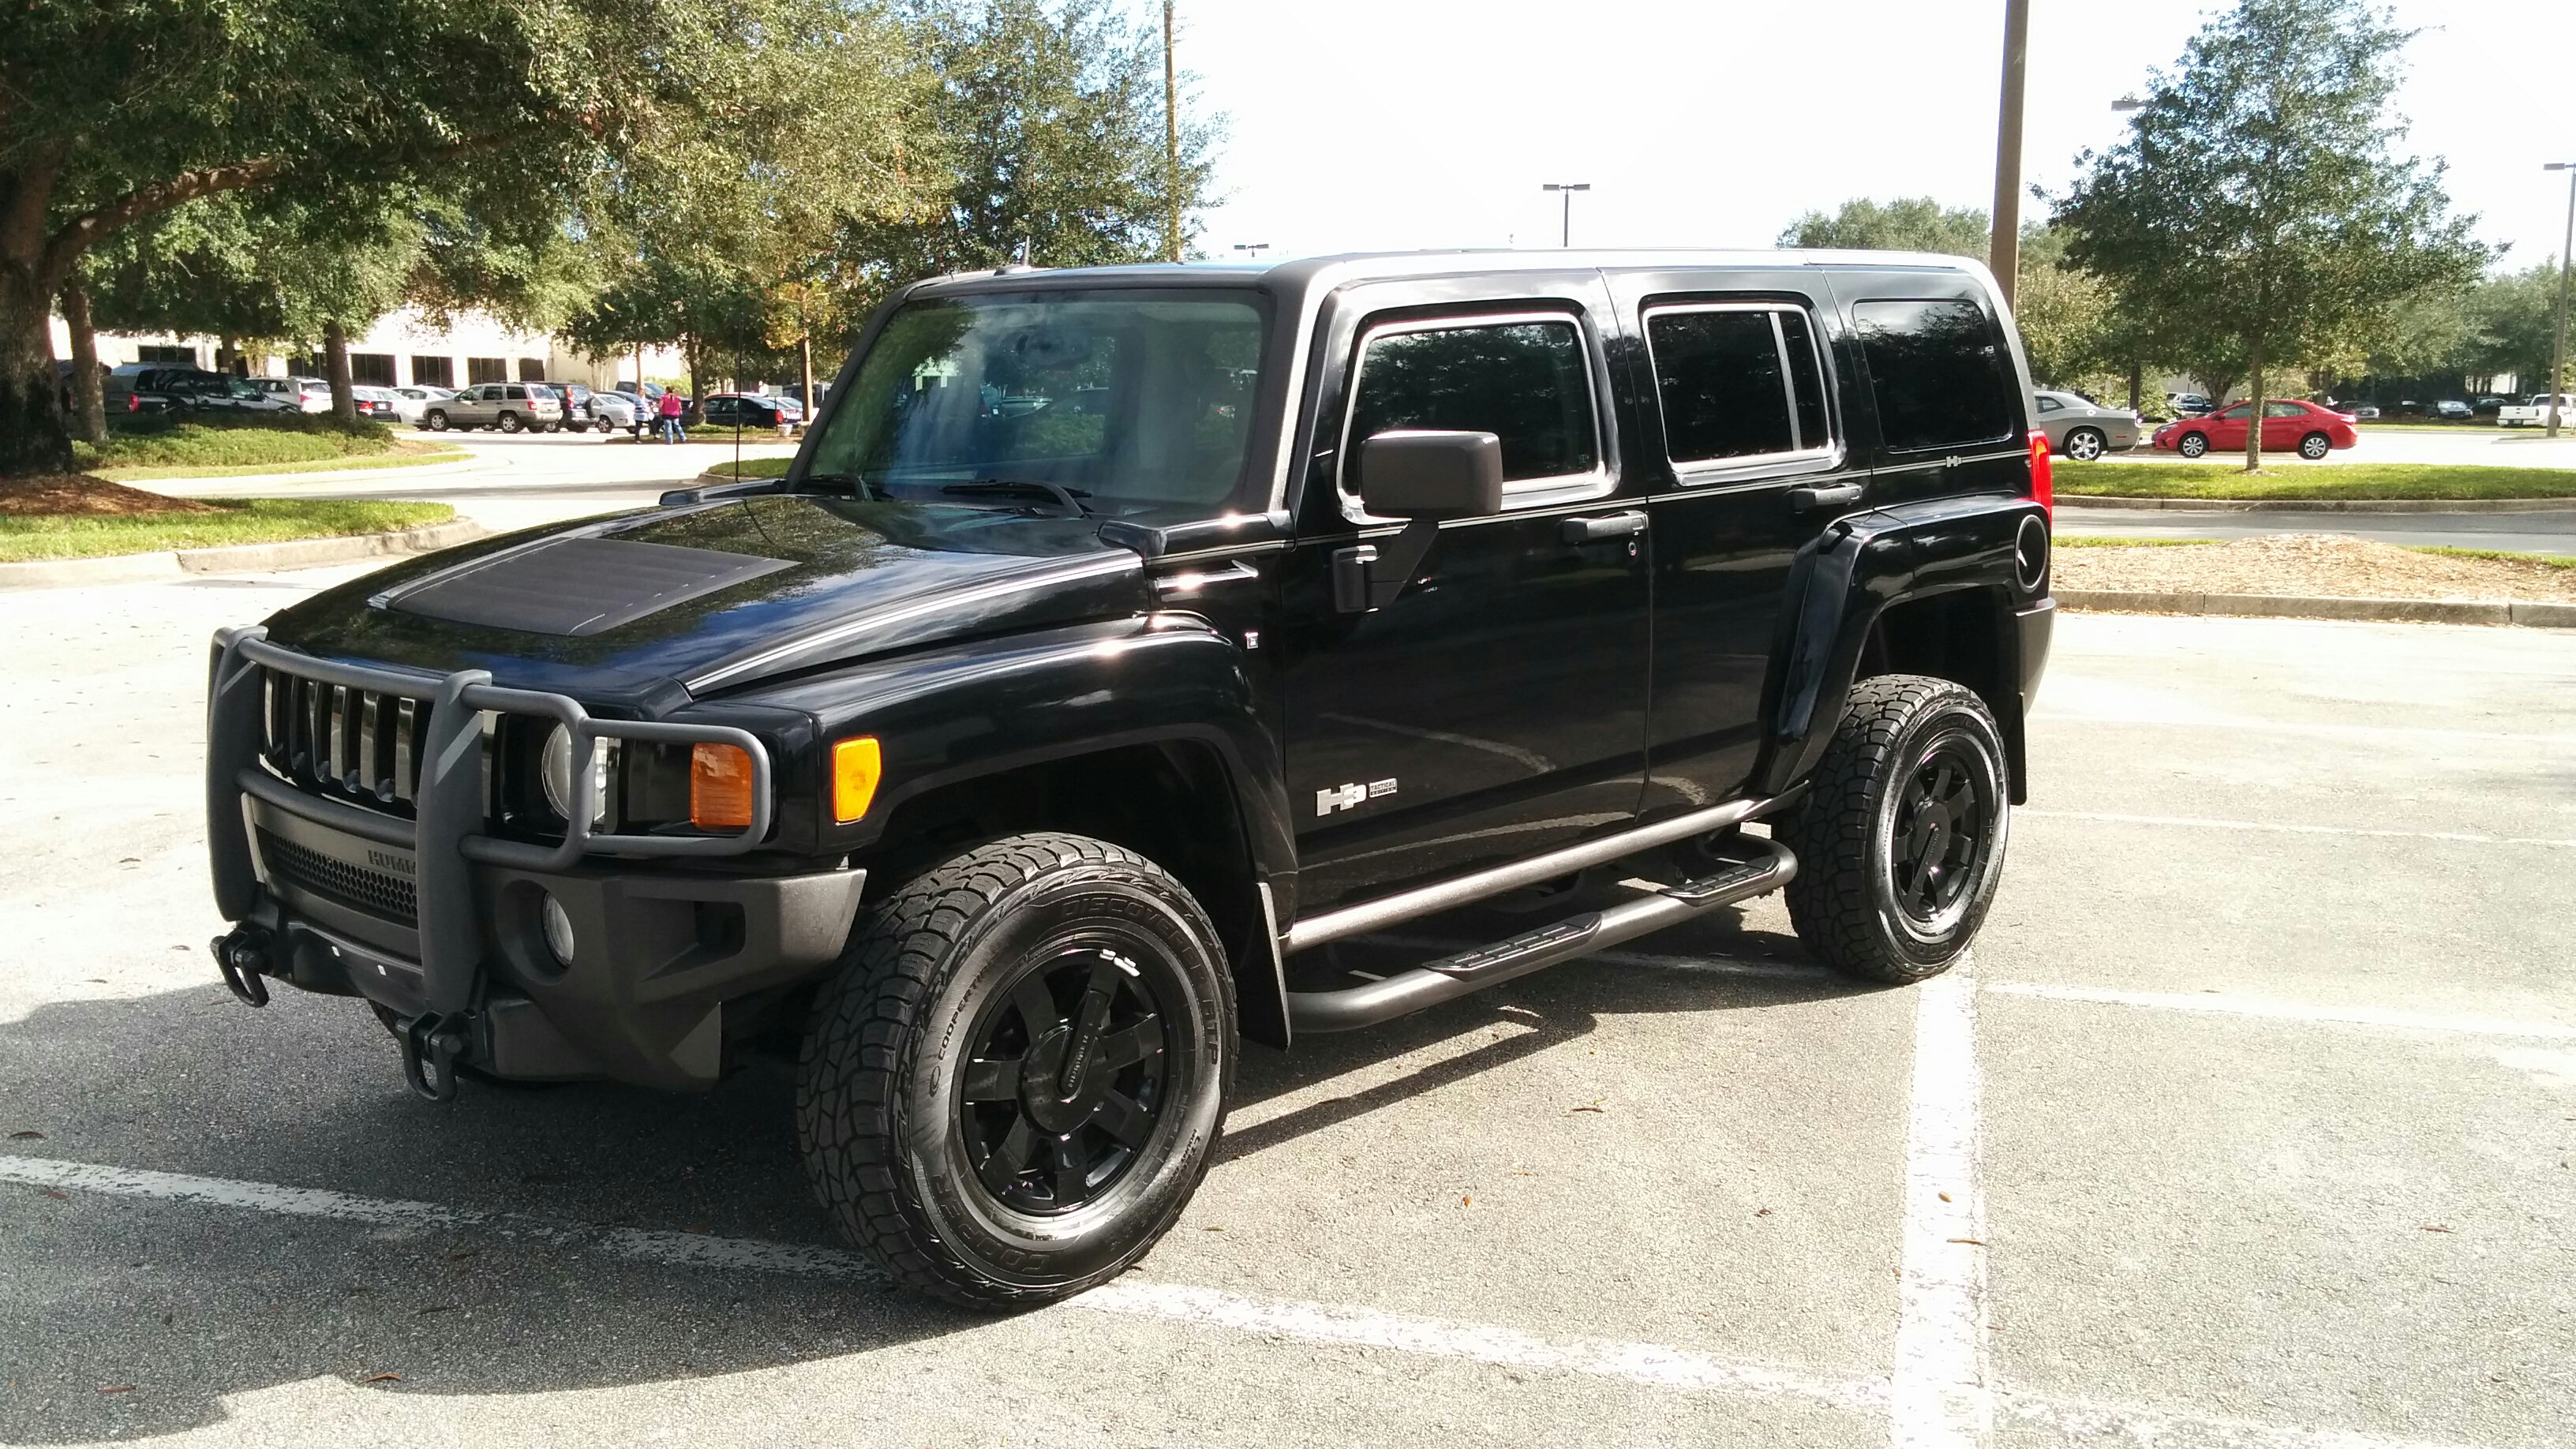 2007 H3 Tactical Edition for Sale - Hummer Forums ... chevy trailer wiring harness 